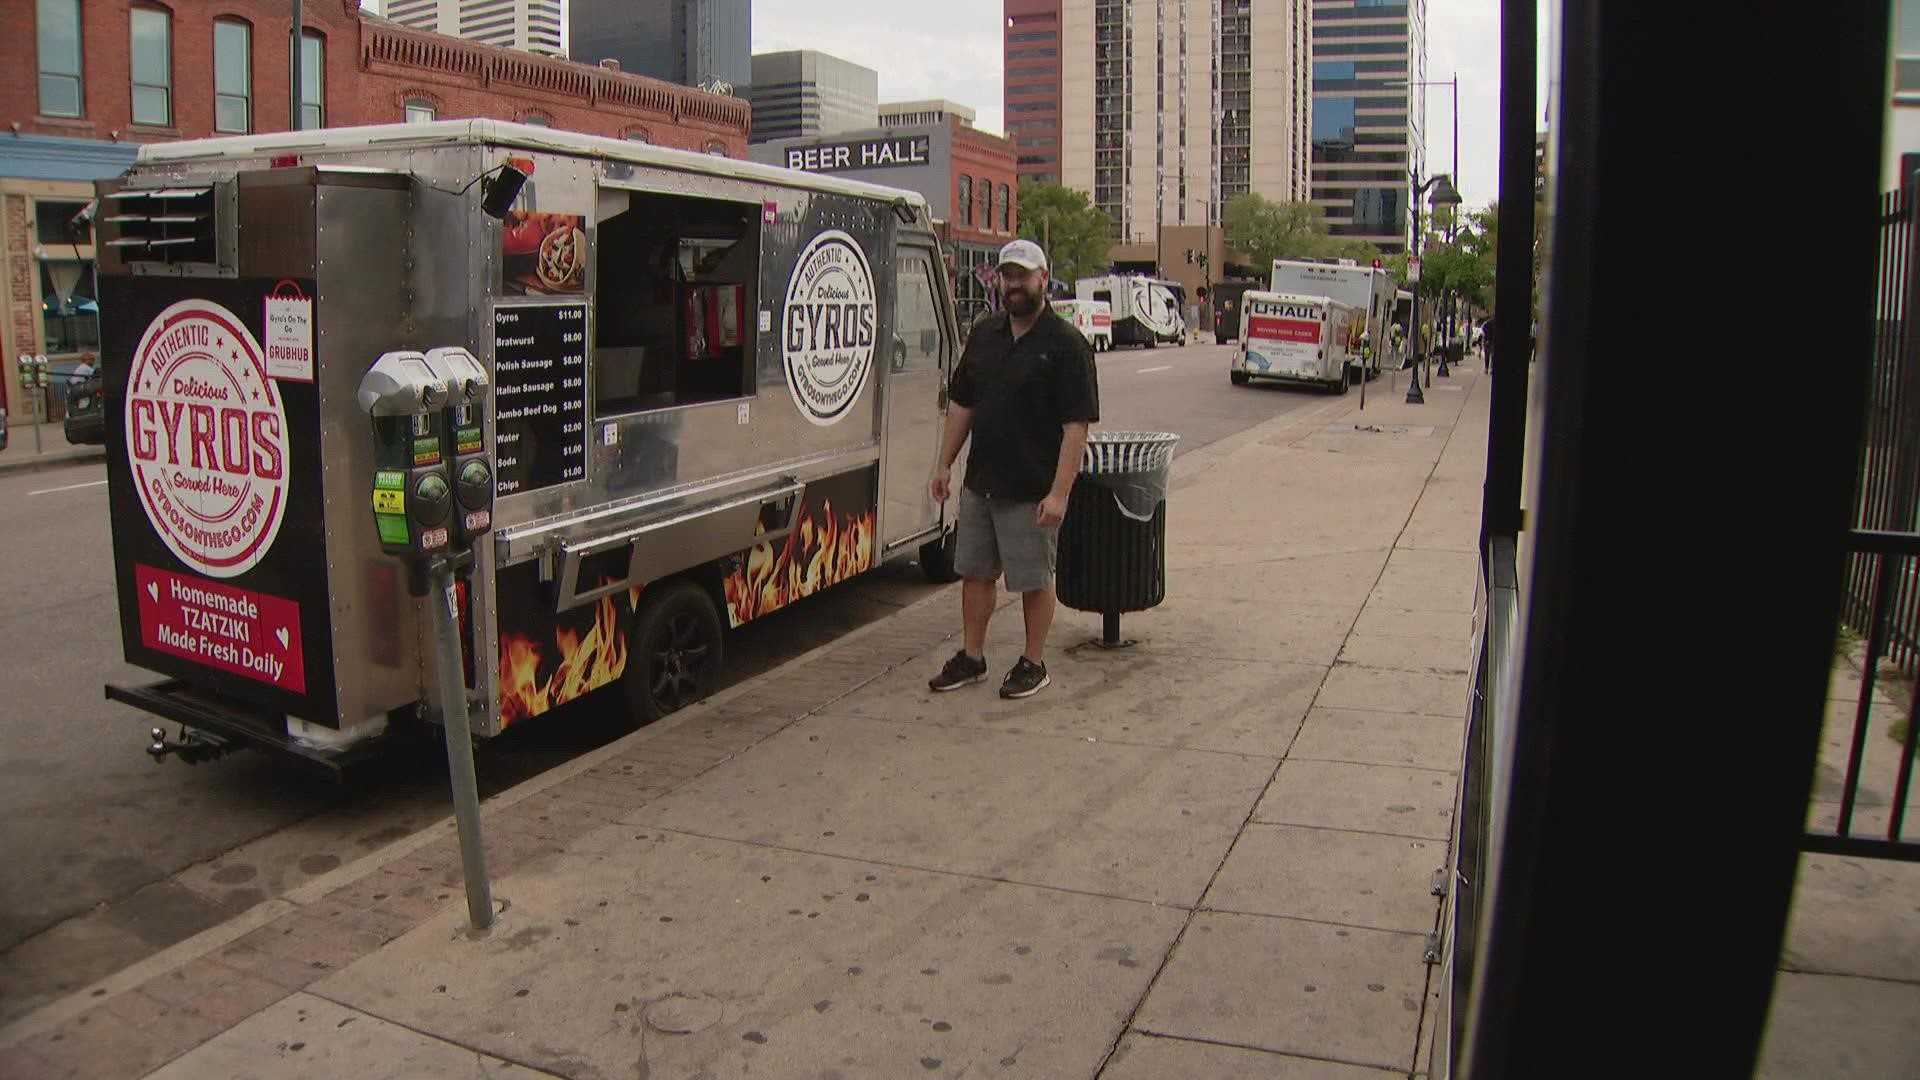 Food truck owners who survive by operating outside of bars on weekends say the decision to ban them from the area won't solve any problems.